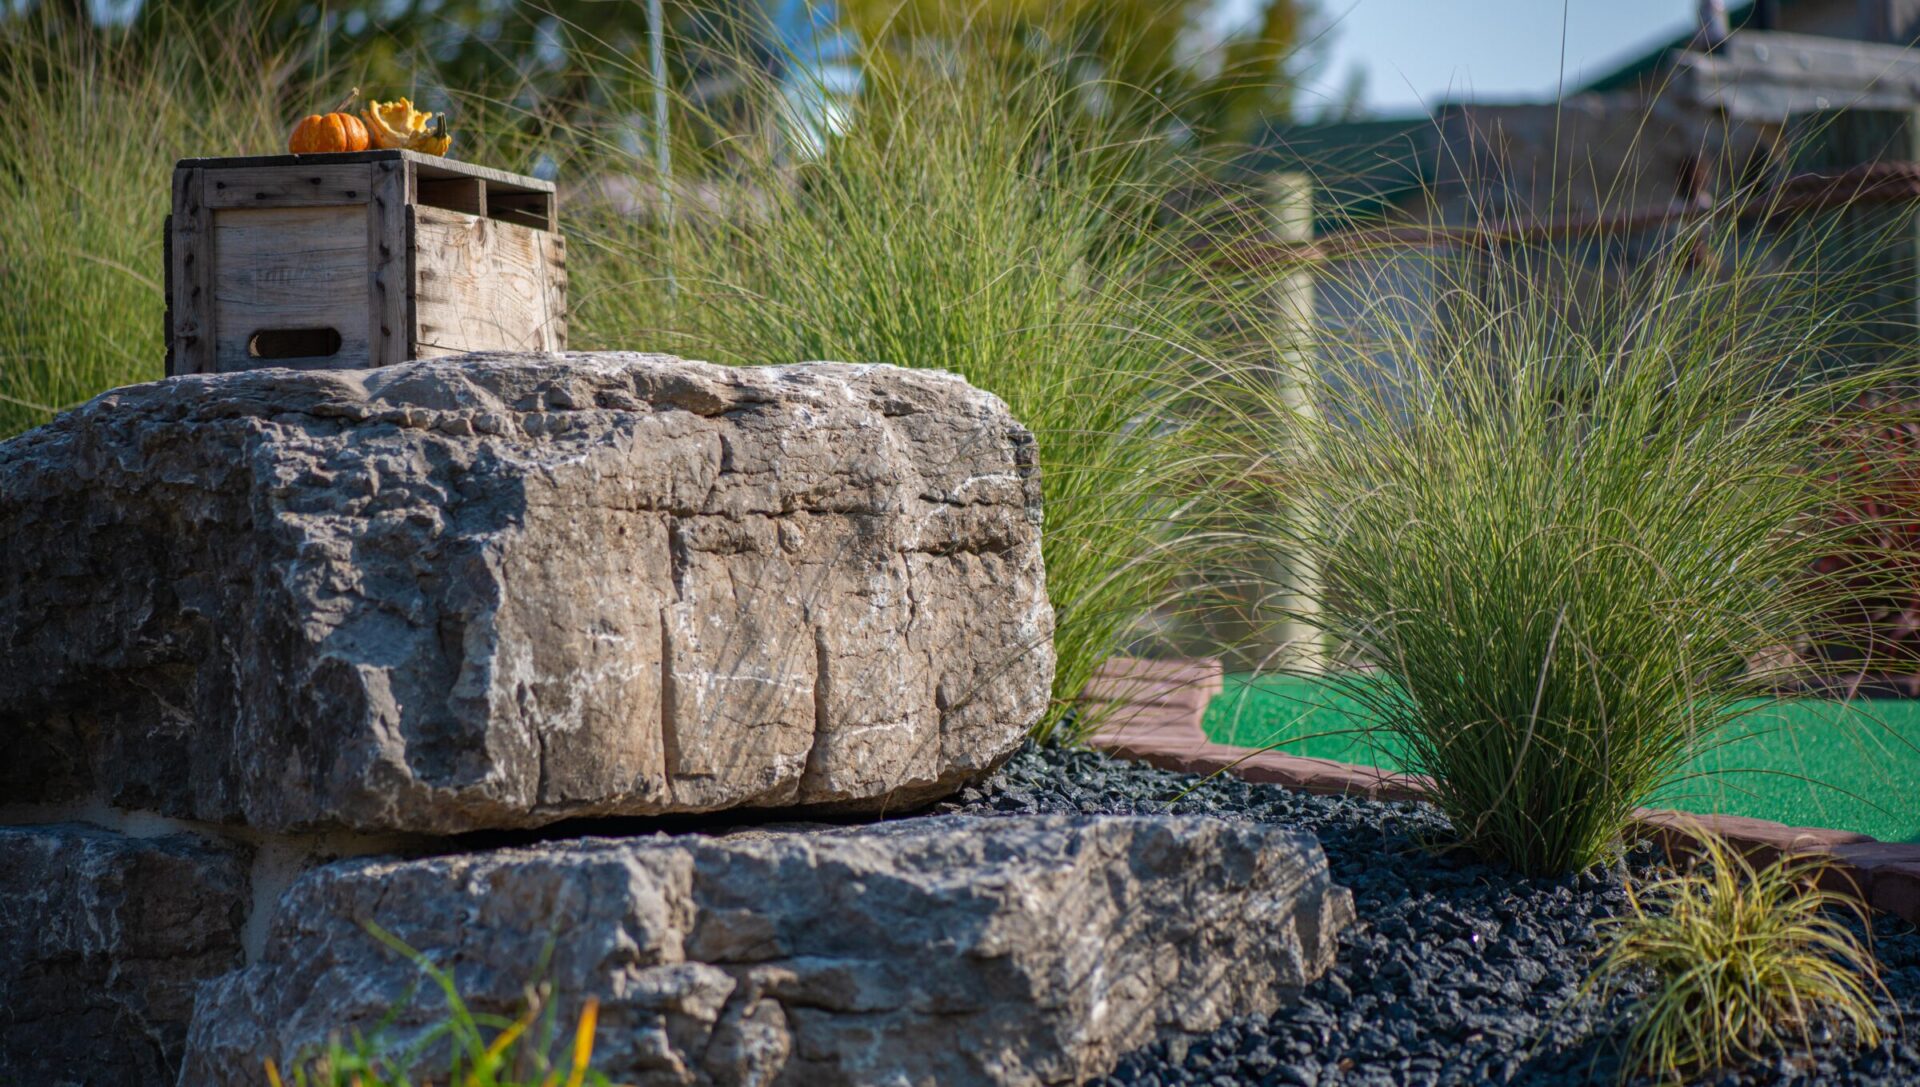 This image shows large textured rocks with a rustic wooden crate on top, small pumpkins, lush green grasses, black pebbles, and a hint of artificial turf.